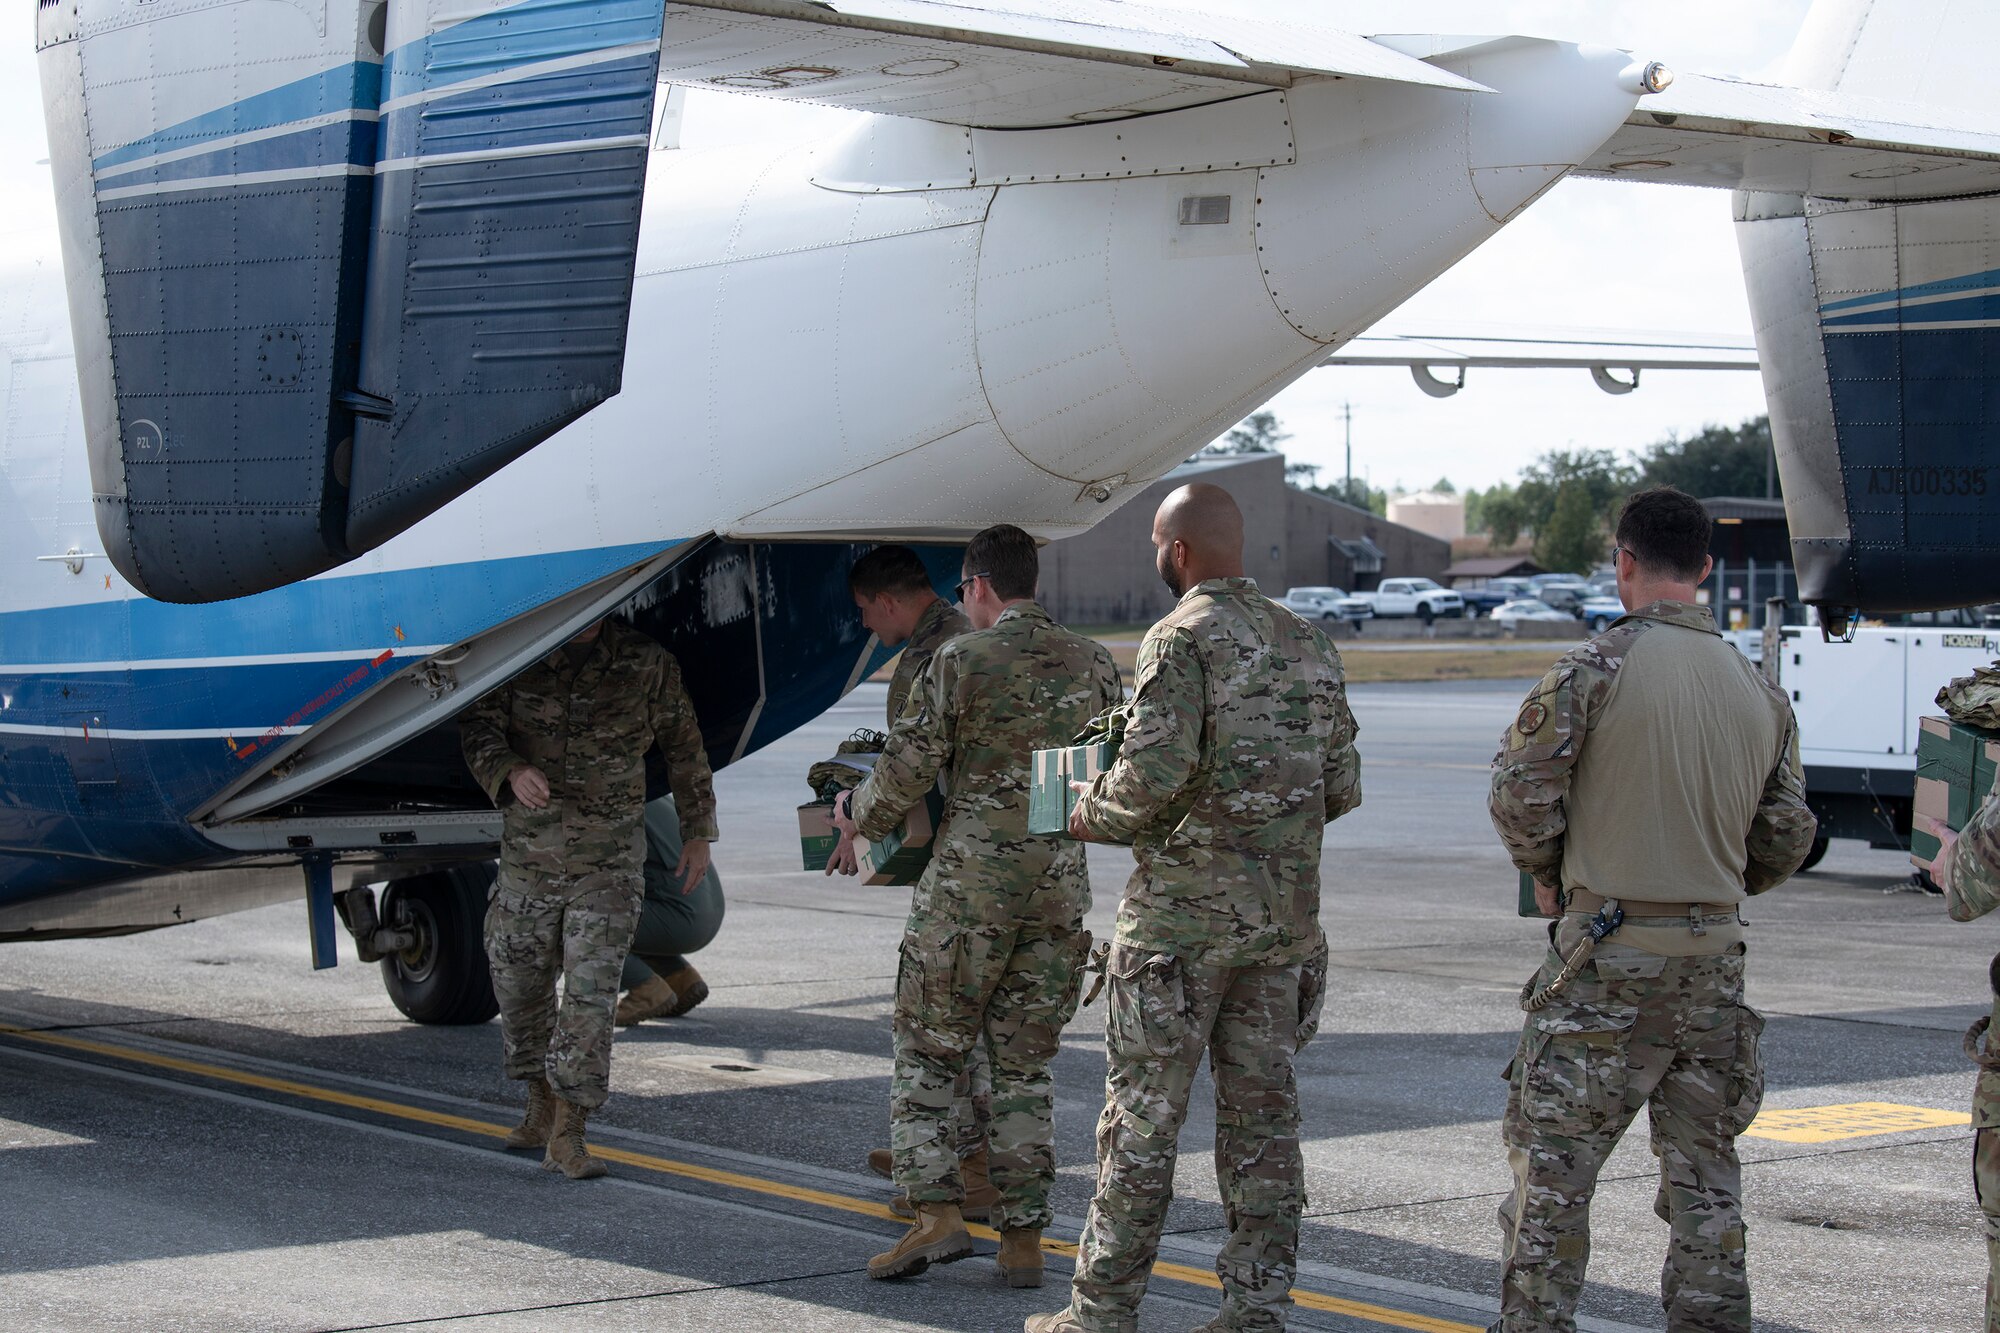 Airmen load a C-145A Combat Coyote aircraft with improvised parachute bundles.